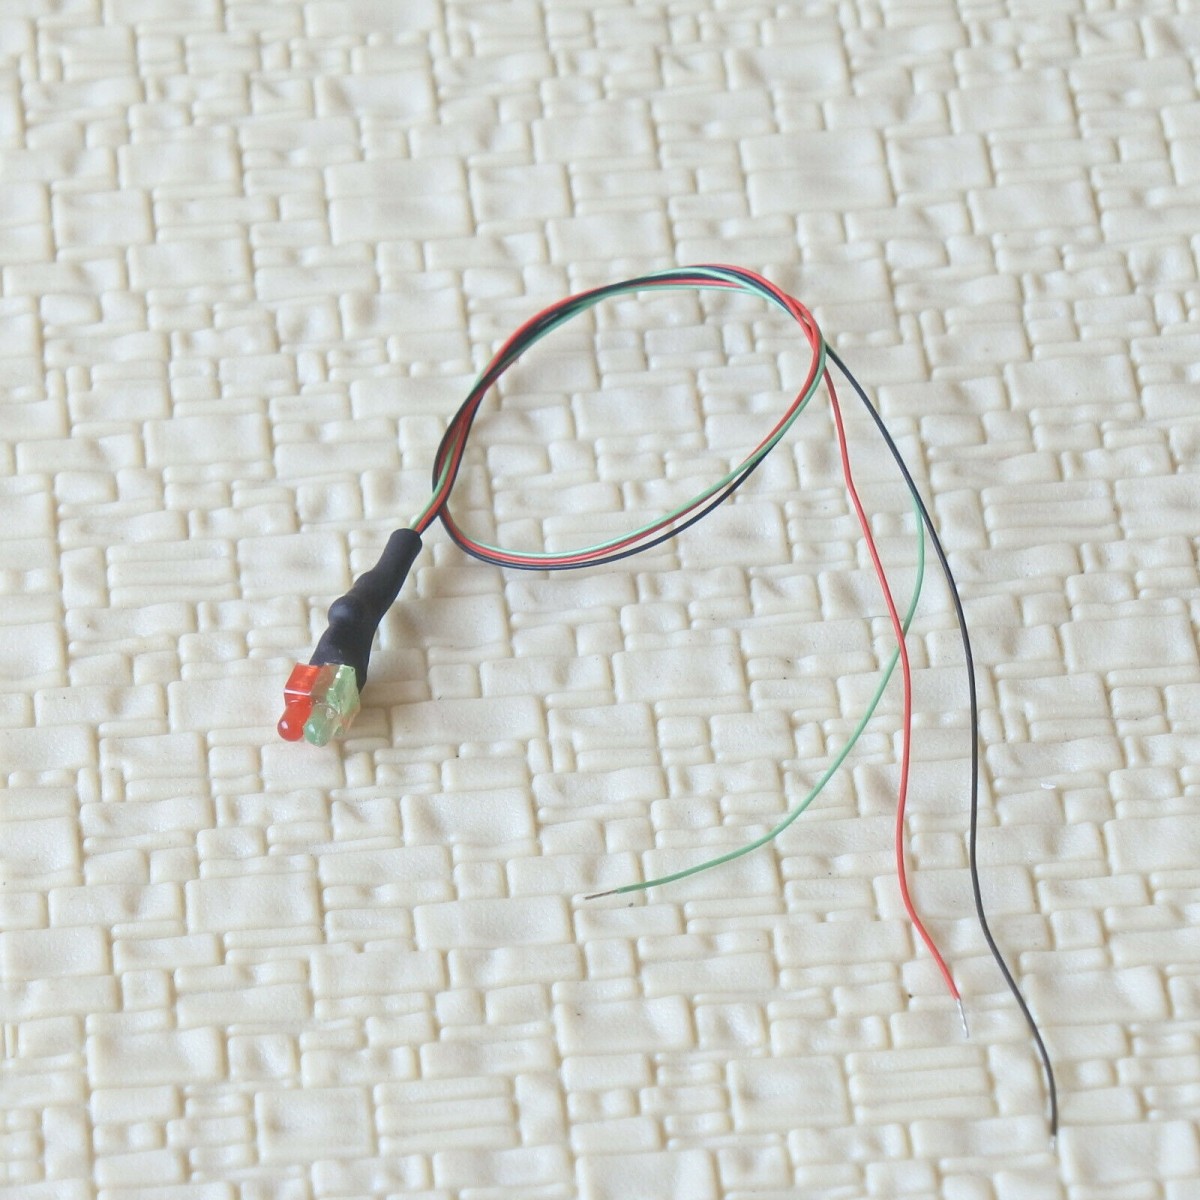 5 x pre-soldered 2mm bicolor LEDs flashing red + constant green wired resistor